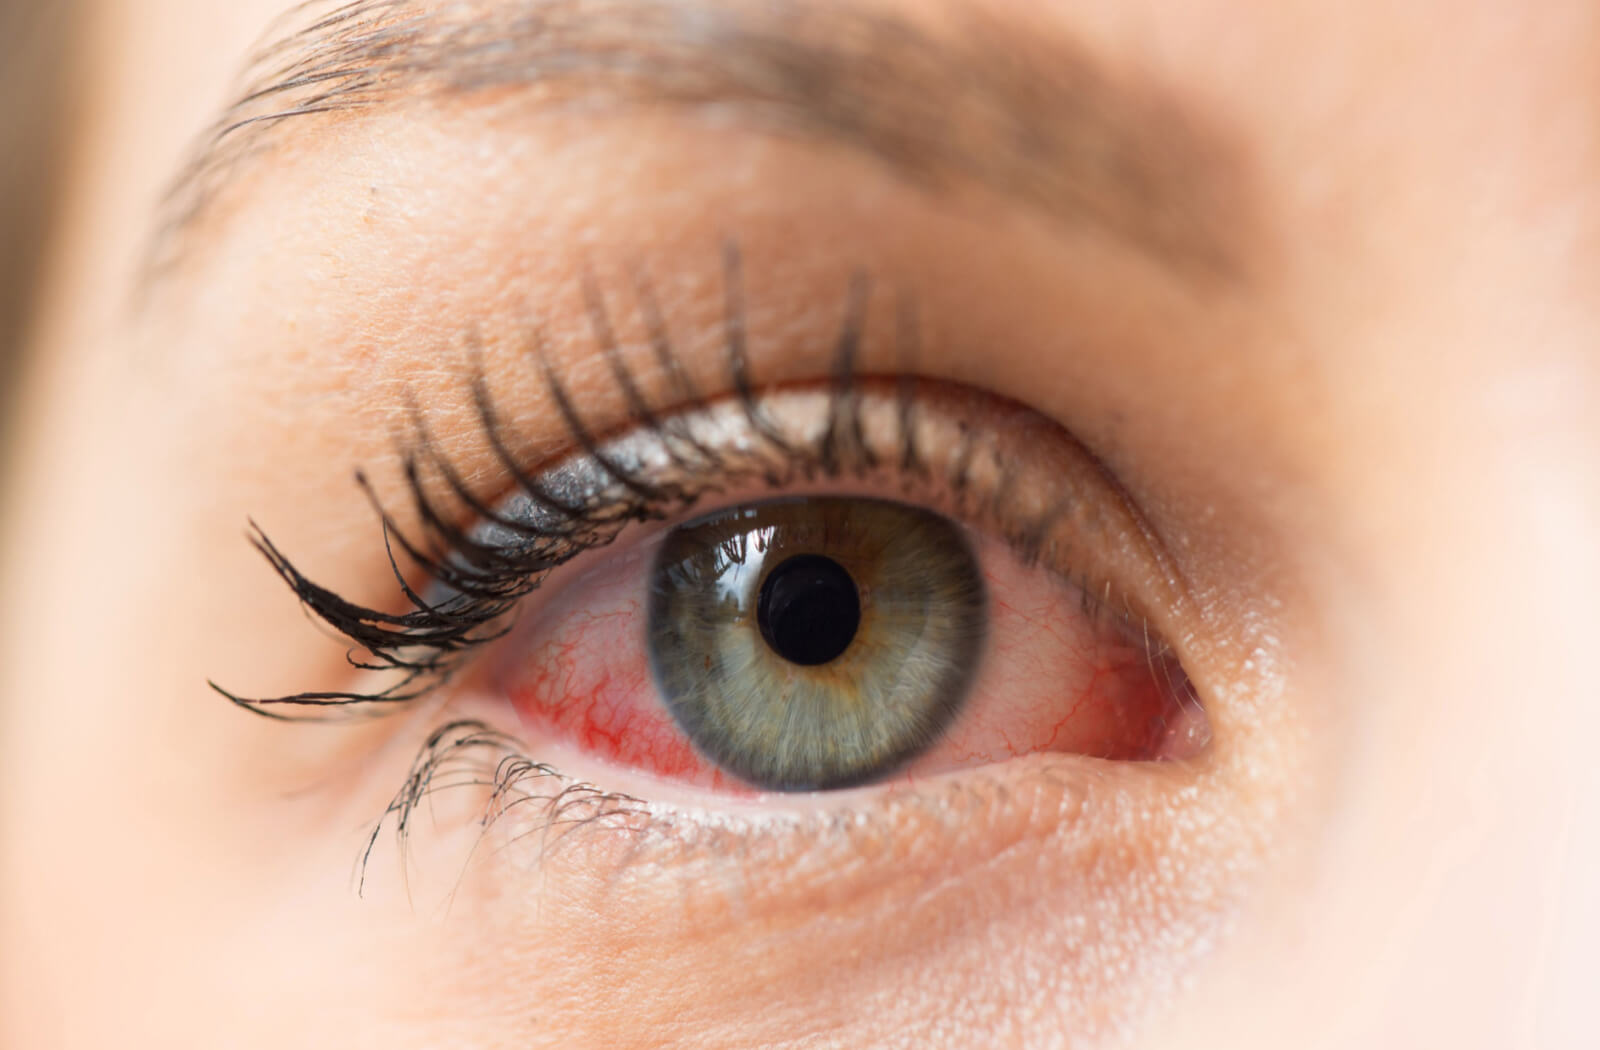 a close up of a womans eye which is red and puffy due to dry eye